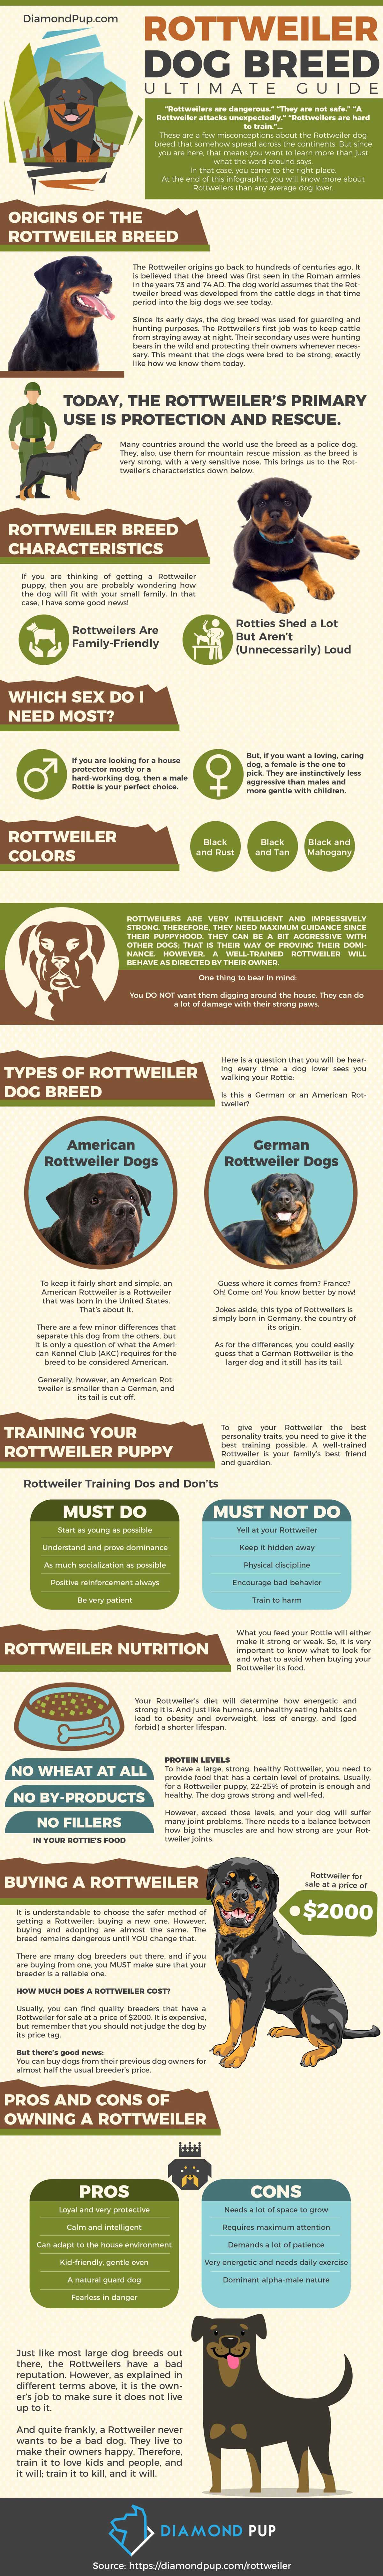 Rottweiler Dog Breed Ultimate Guide